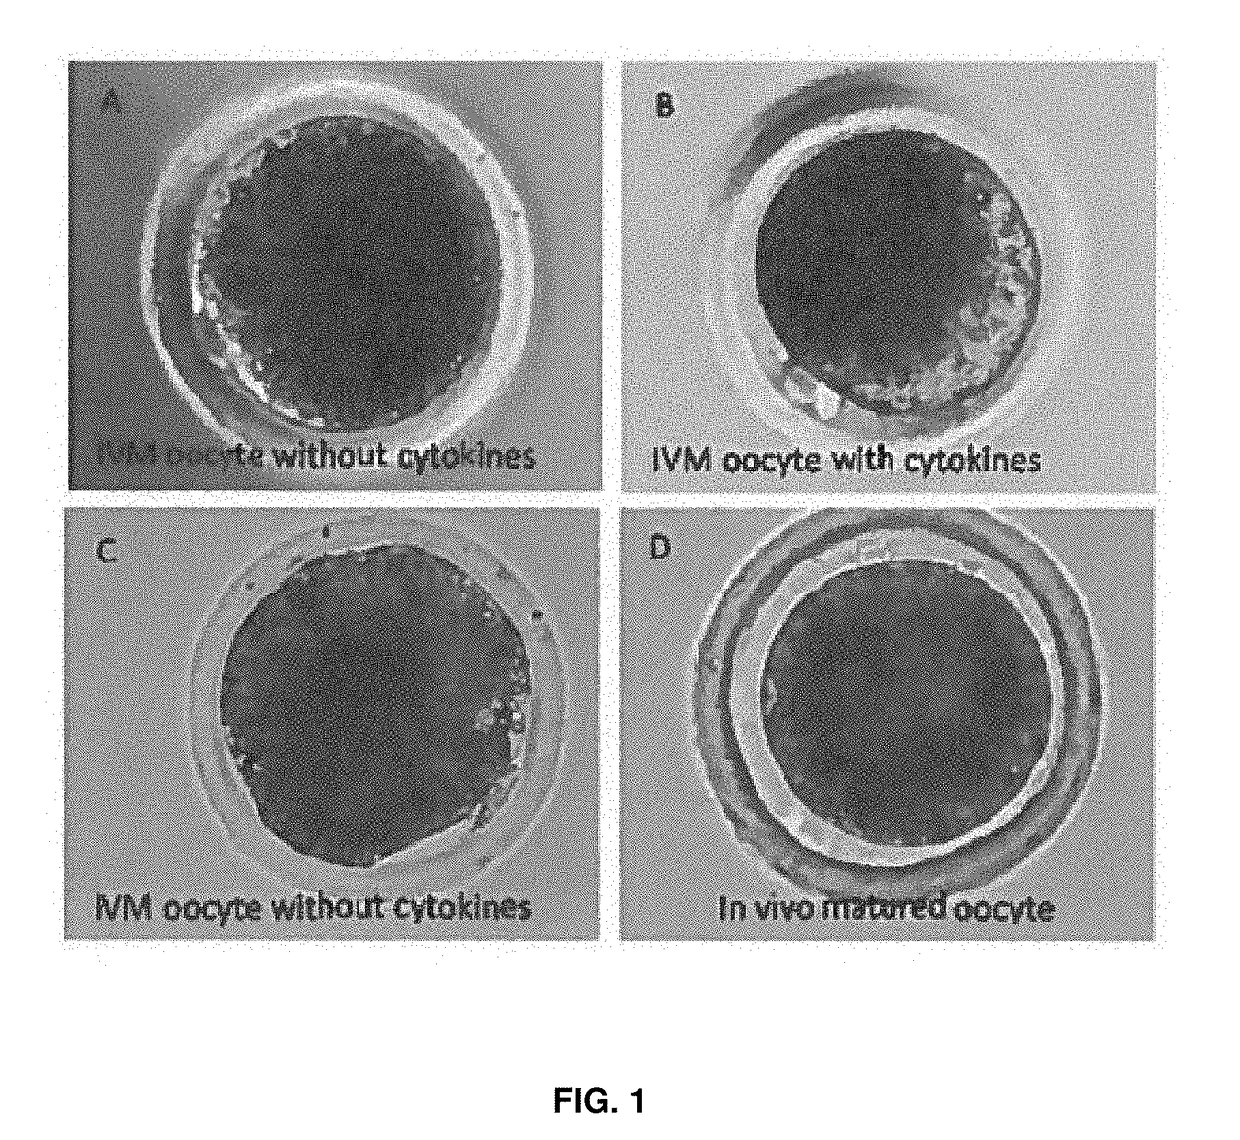 Medium supplement to increase the efficiency of oocyte maturation and embryo culture in vitro